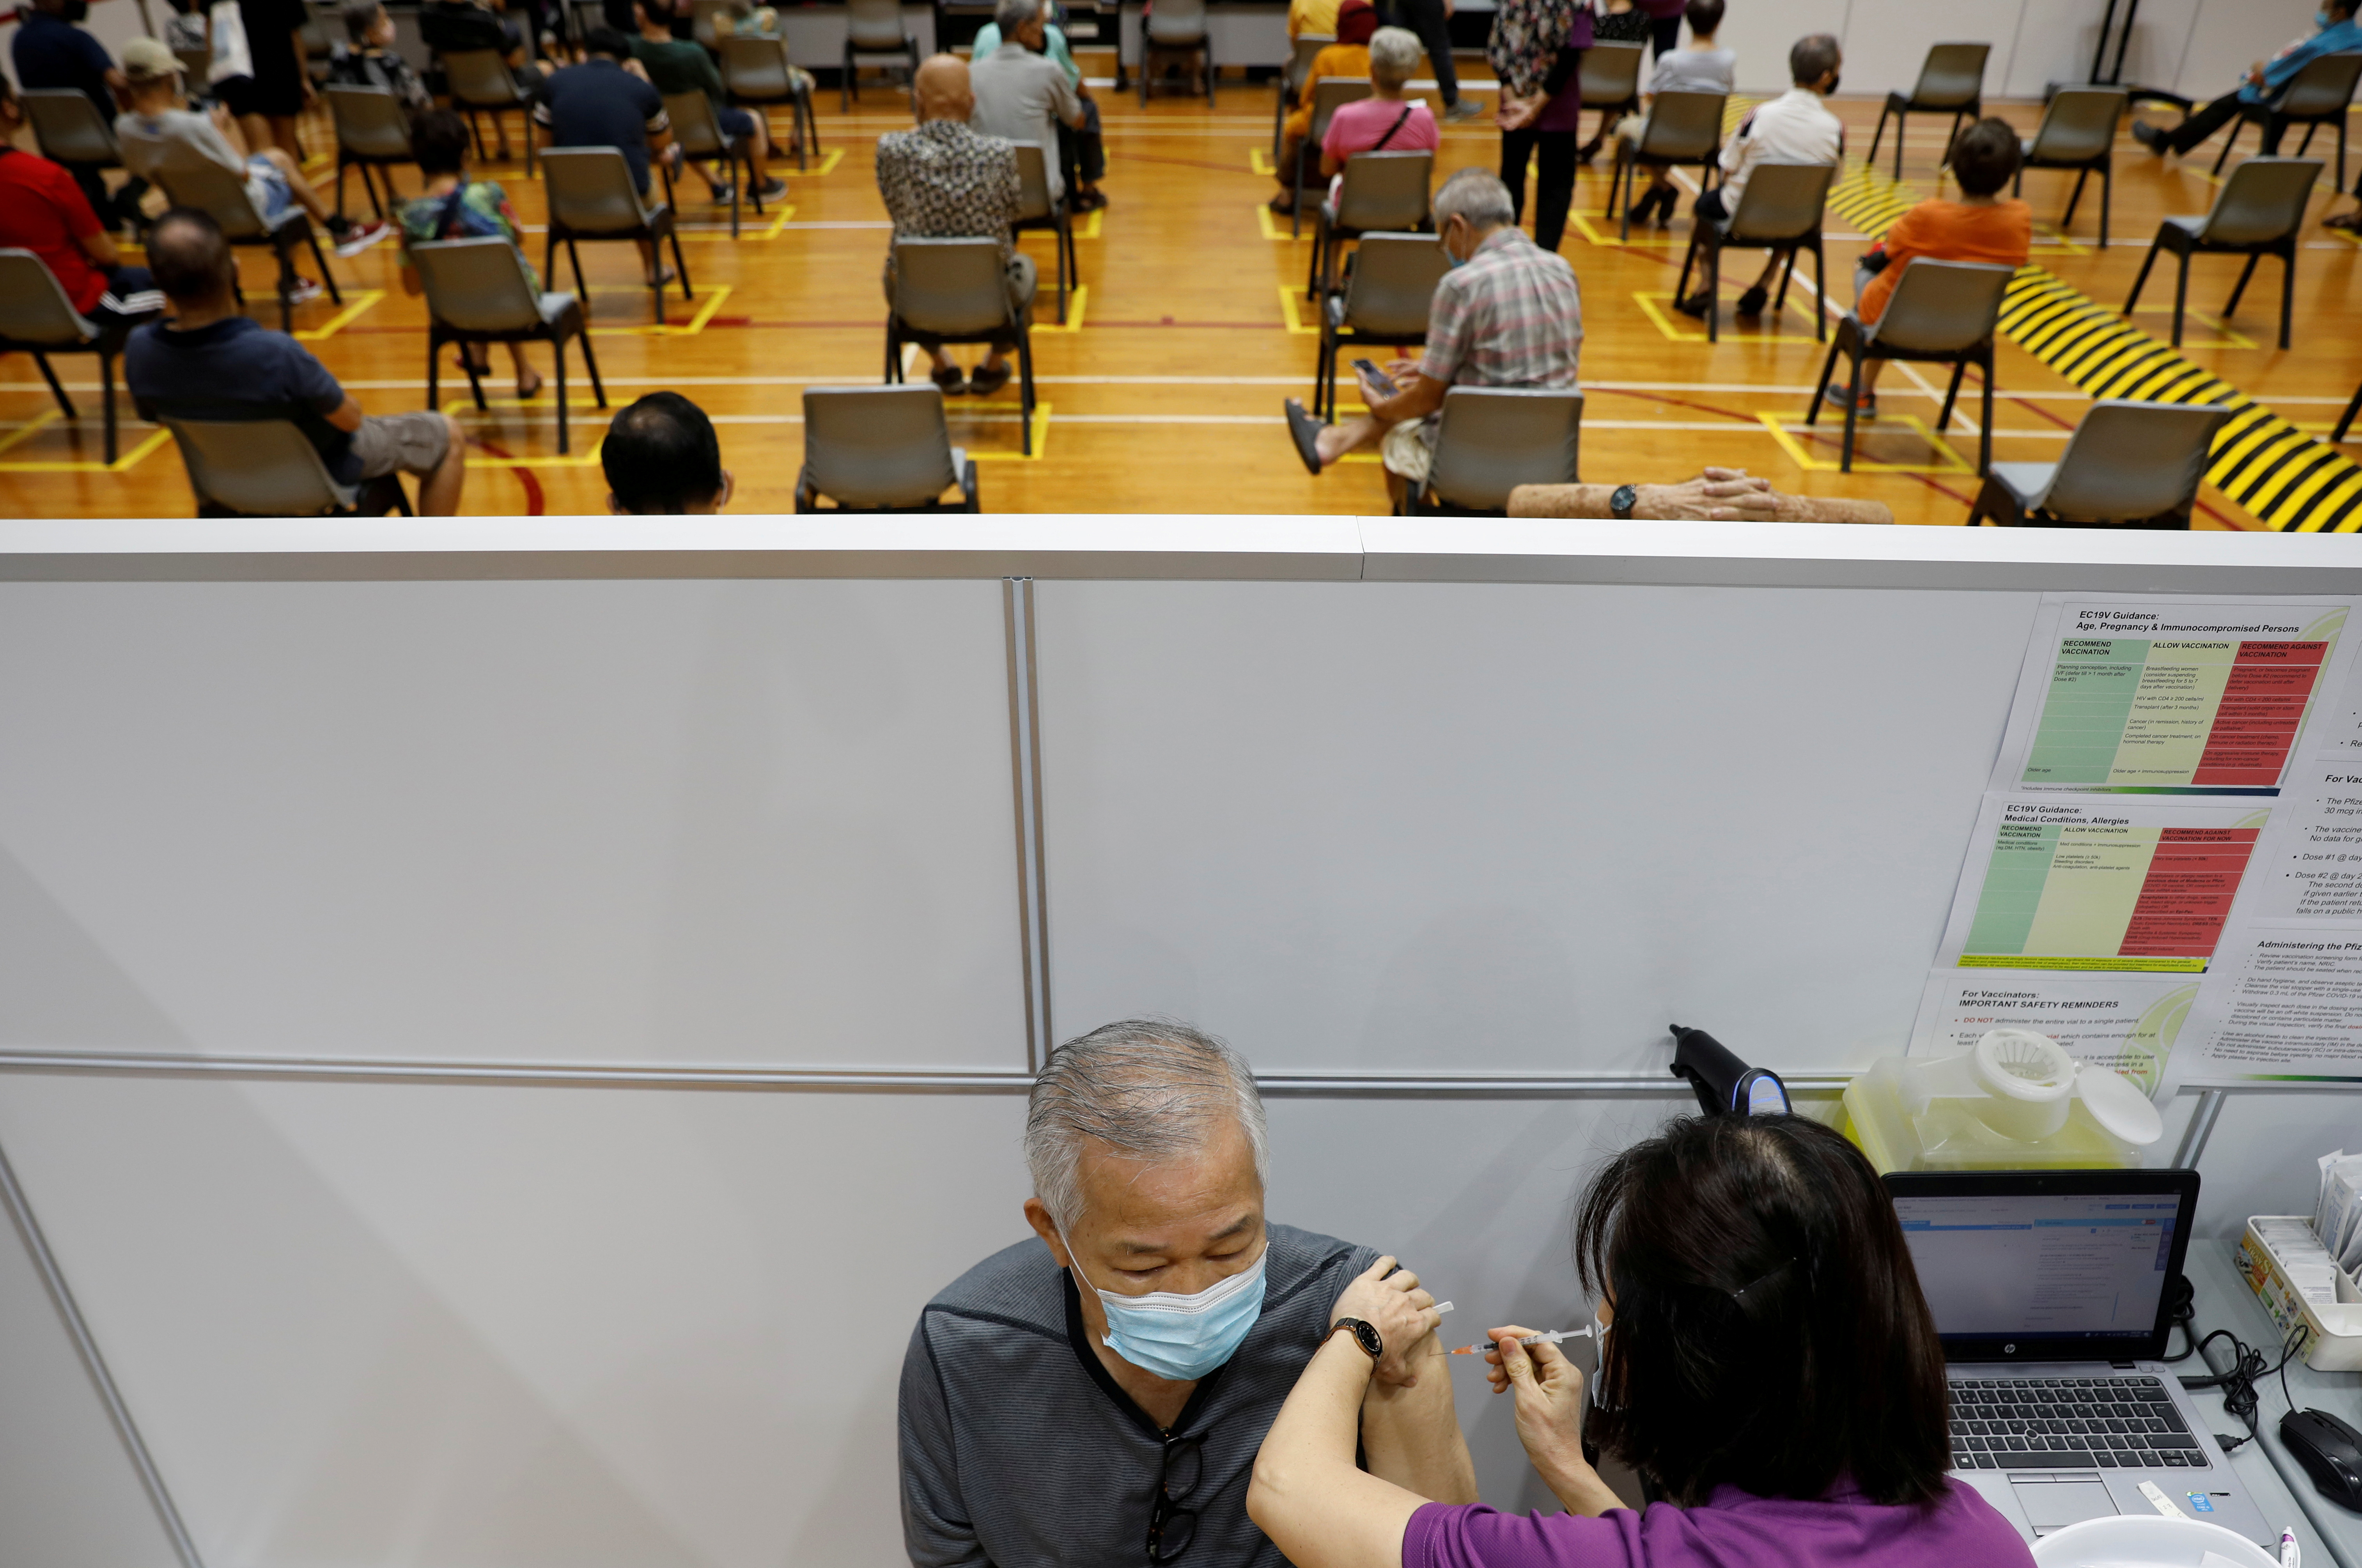 A man receives his vaccination at a coronavirus disease (COVID-19) vaccination center in Singapore